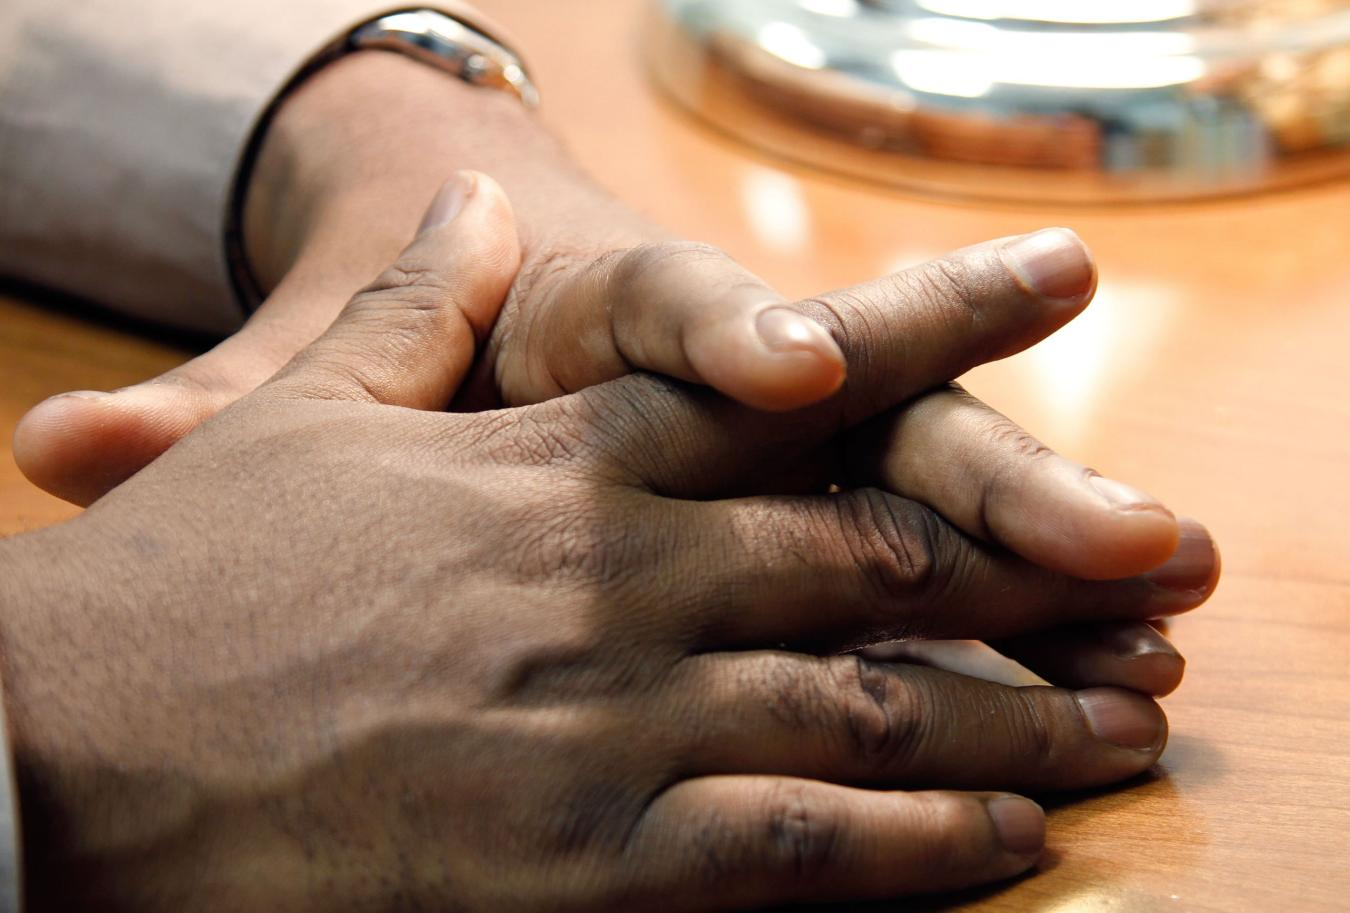 Hands resting on table with fingers interlocking.